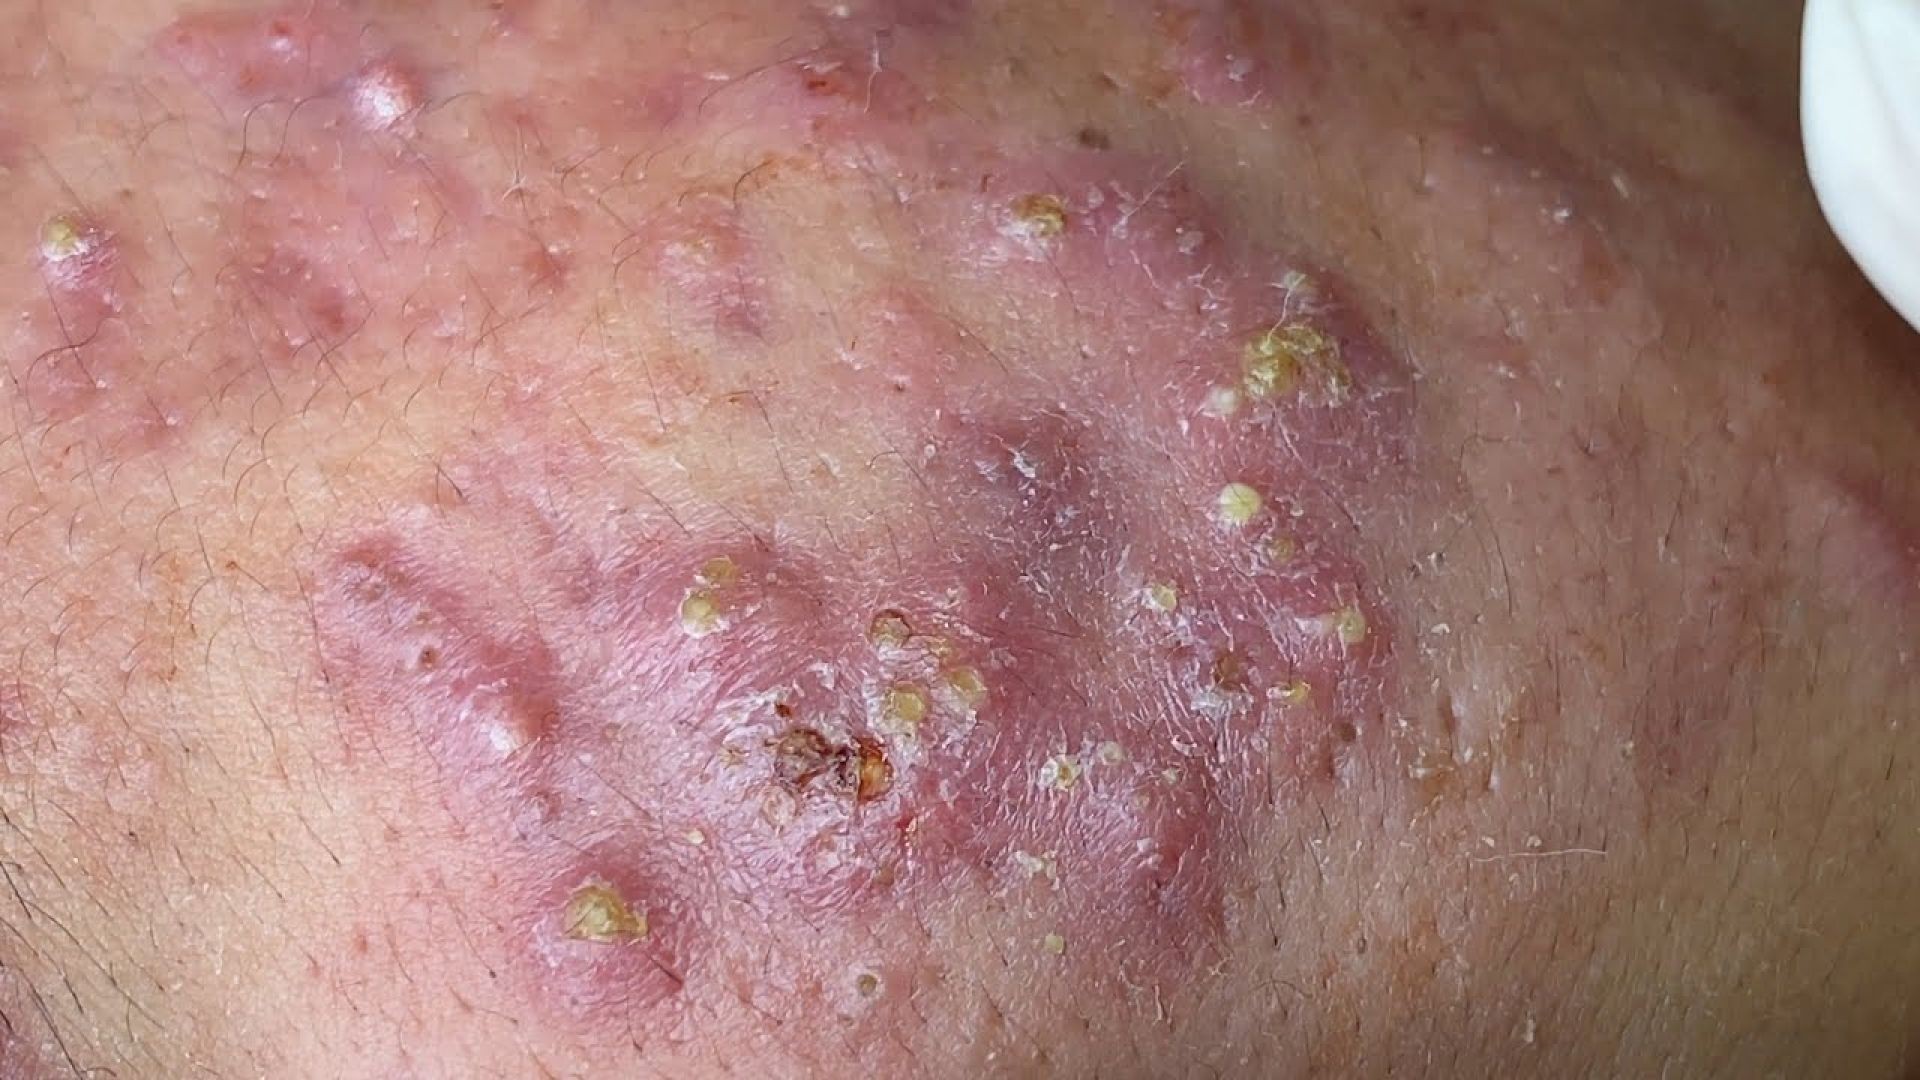 Relax with Massive Cystic Acne Popping Video